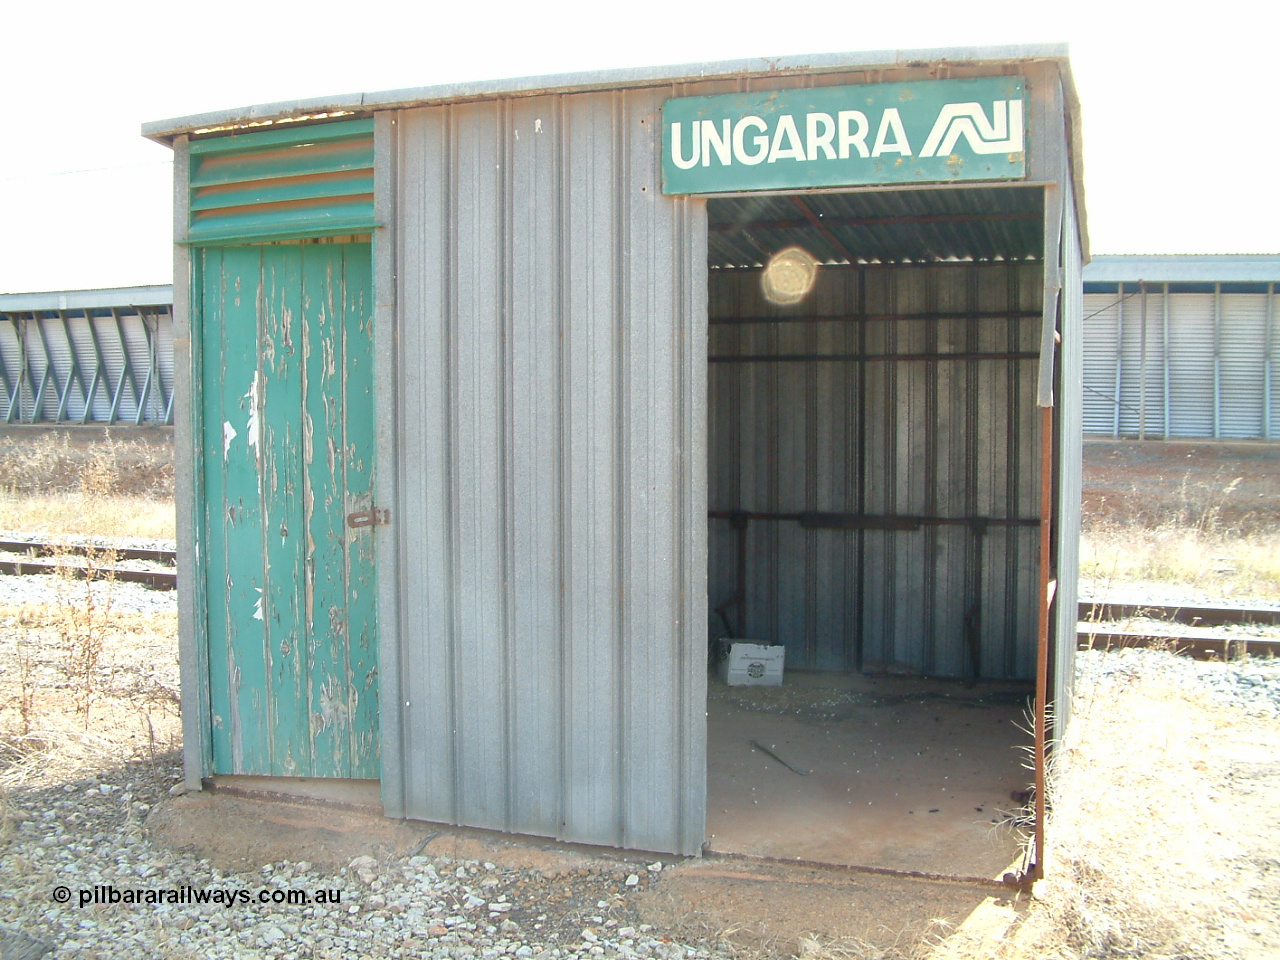 030409 150000
Ungarra, located at the 108.1 km and opened in March 1913 as the temporary terminus till July 1913. Station shelter shed, located between the mainline and the good and grain loop.
